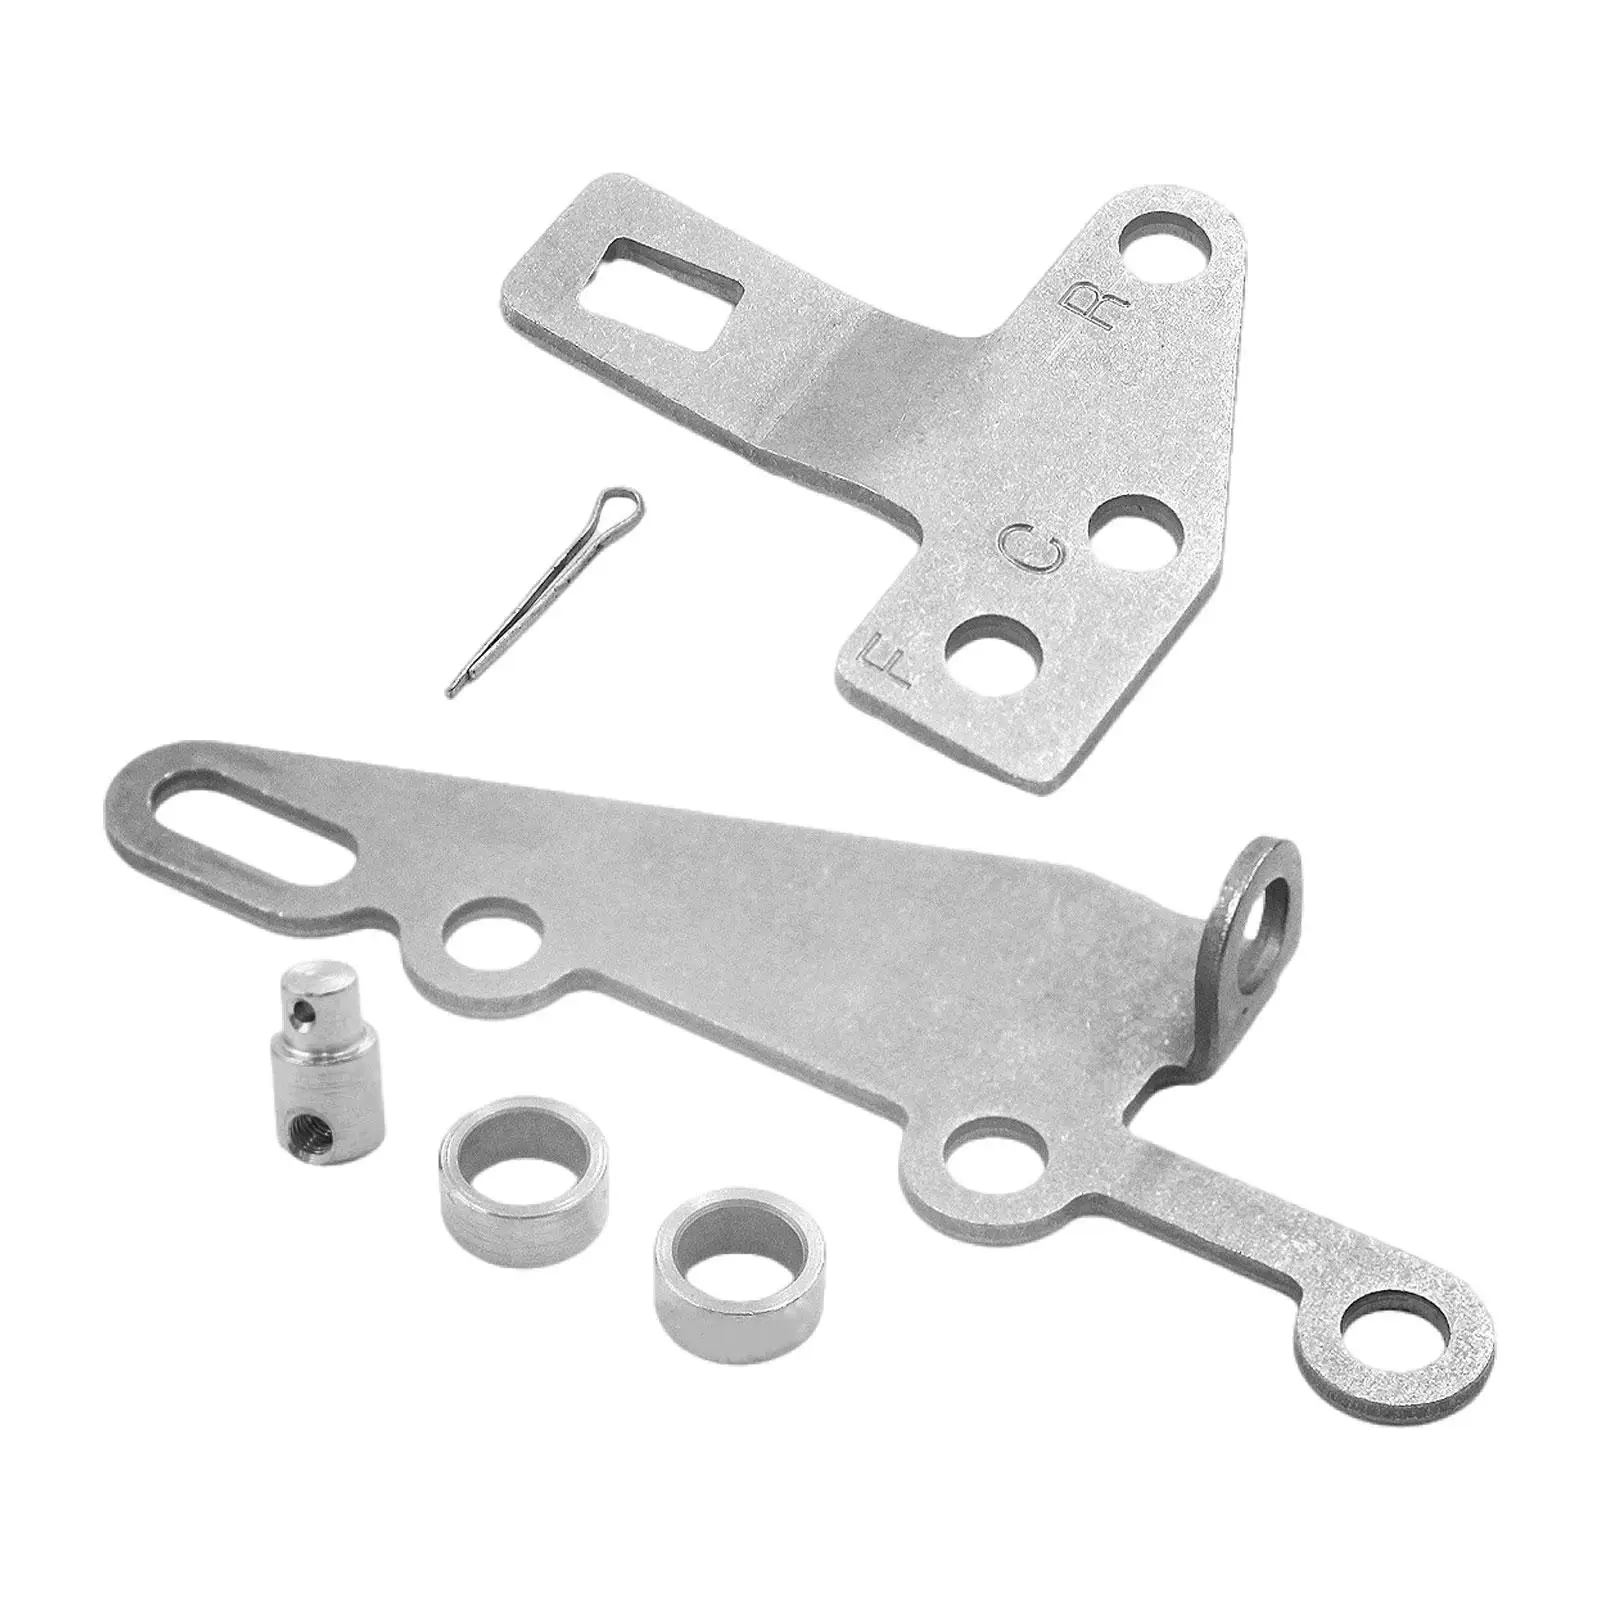 Shifter Bracket Kit Repair Parts for TH400 TH350 4L60 High Performance